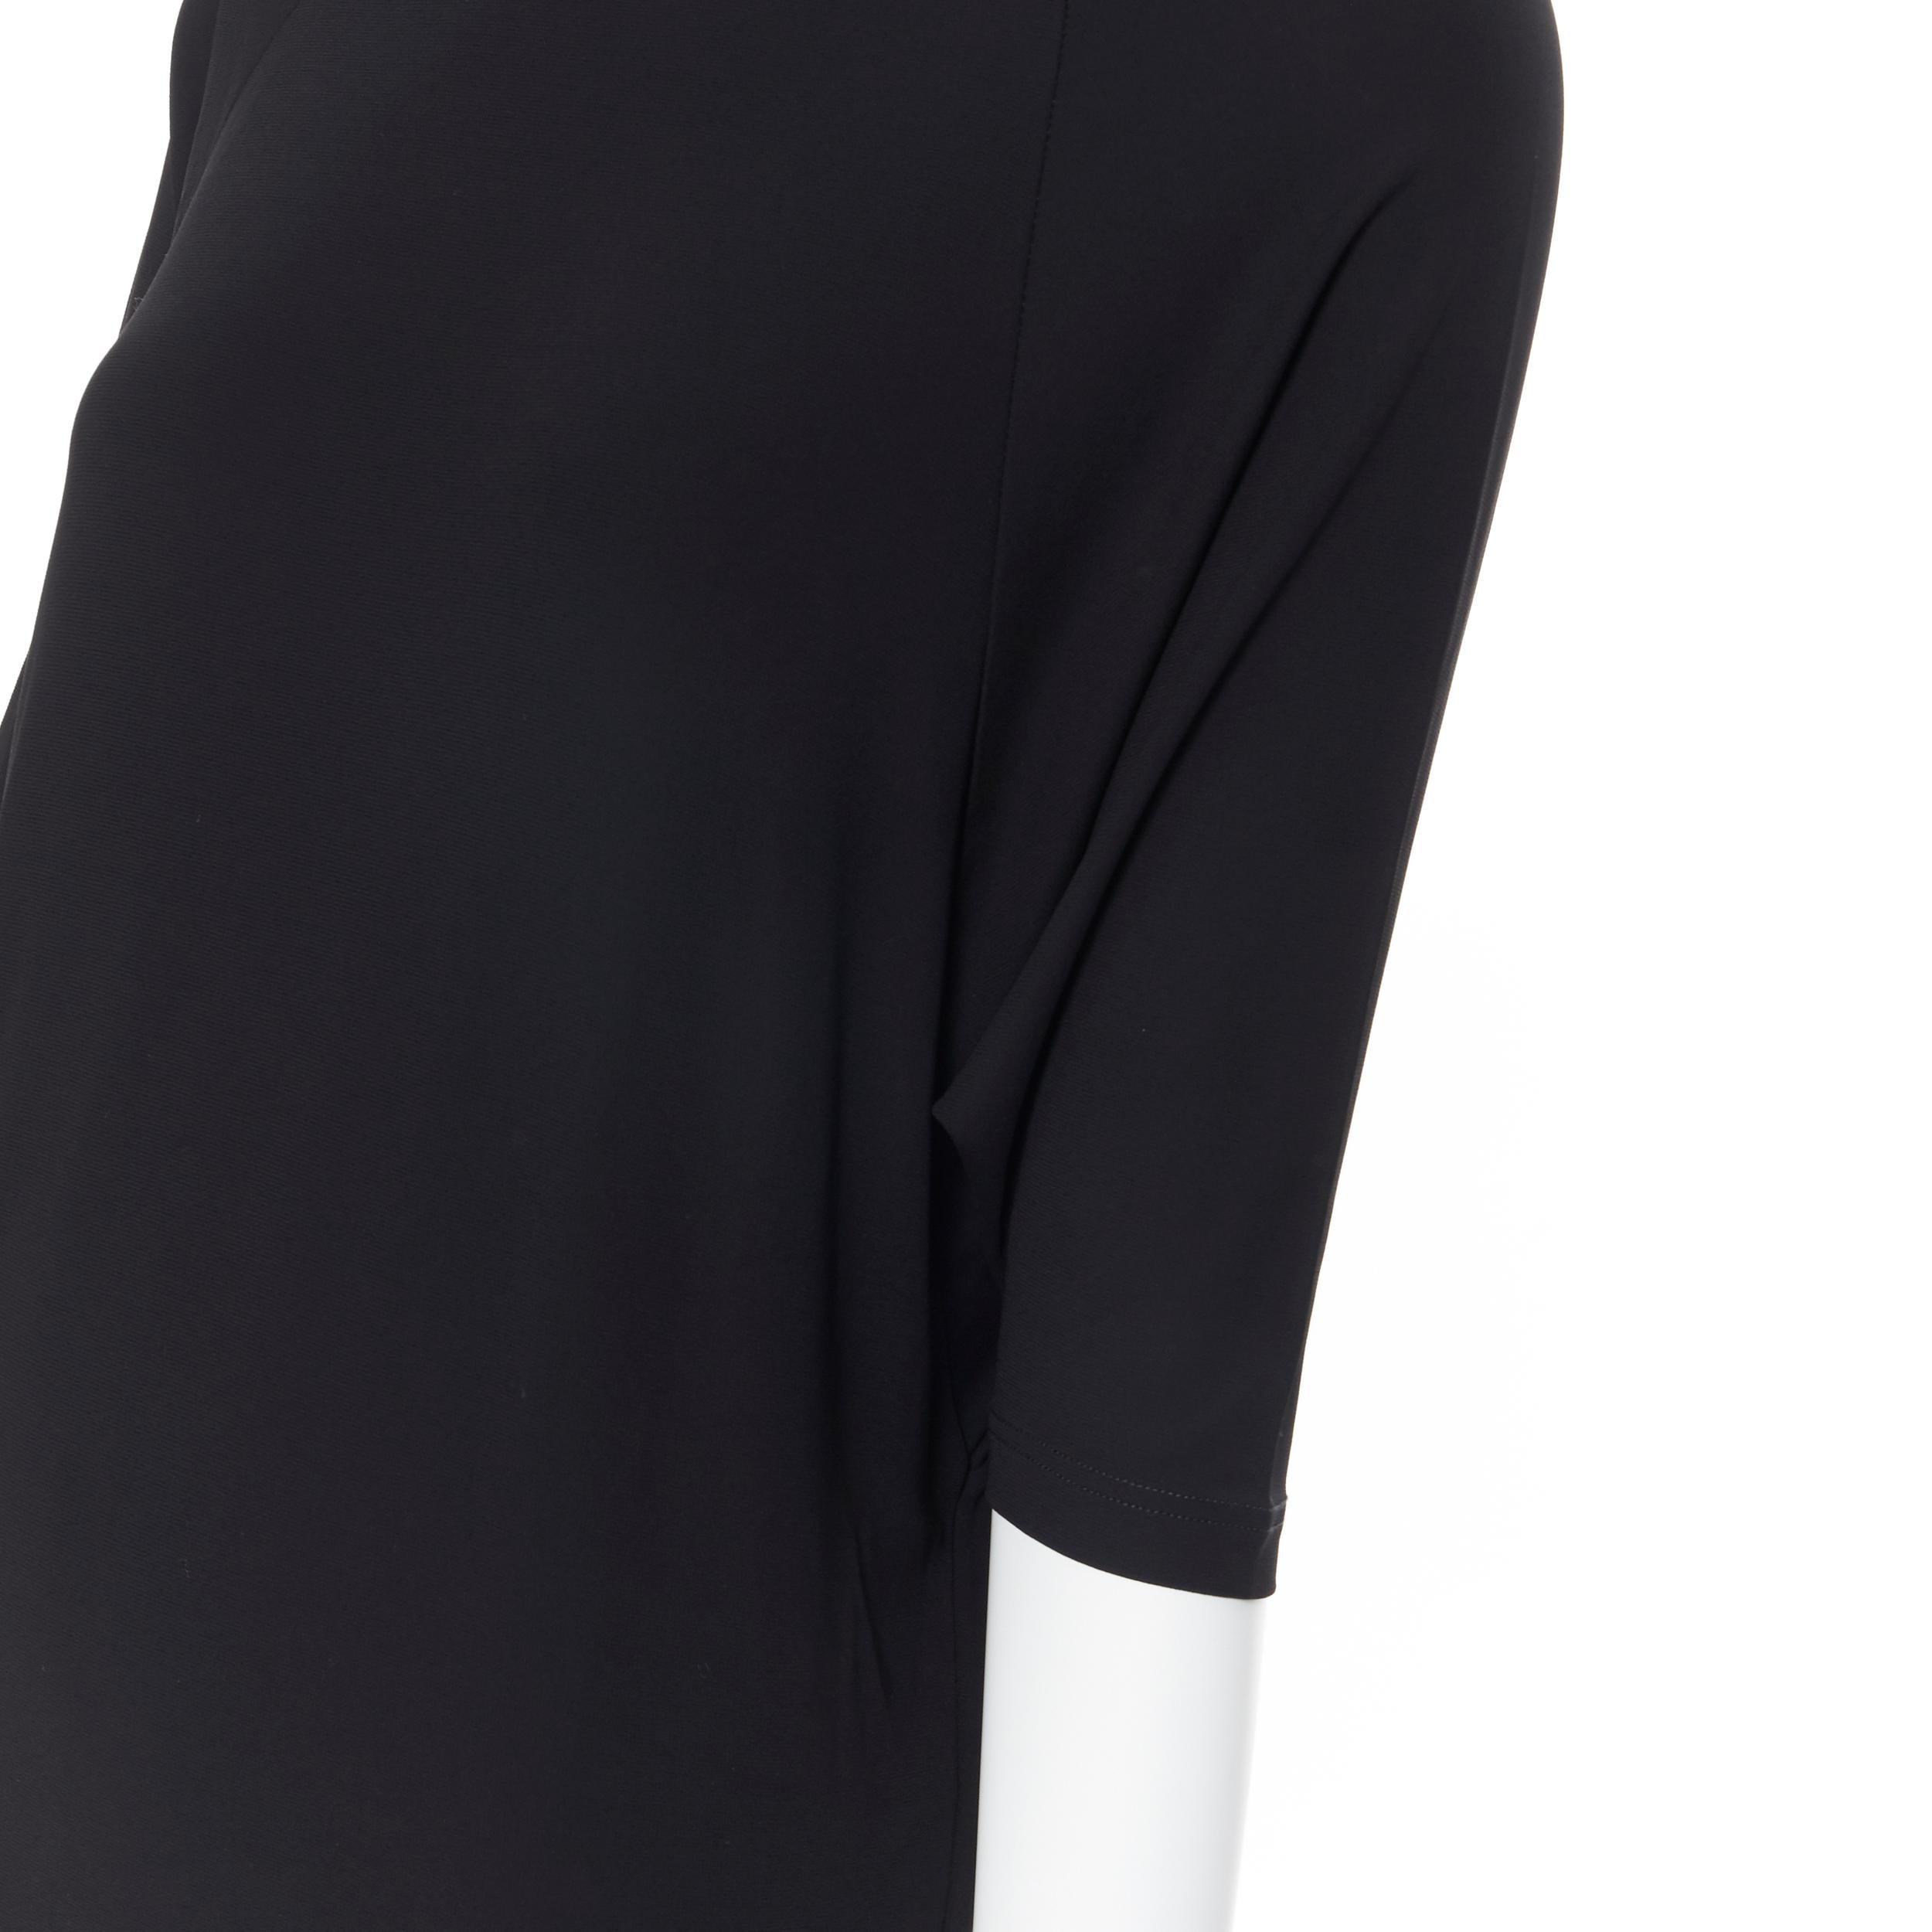 MICHAEL KORS black rayon spandex batwing stretch fit casual dress US0 XS
Brand: Michael Kors
Designer: Michael Kors
Model Name / Style: Batwing dress
Material: Rayon, spandex
Color: Black
Pattern: Solid
Extra Detail: Batwing sleeves. Crew neck